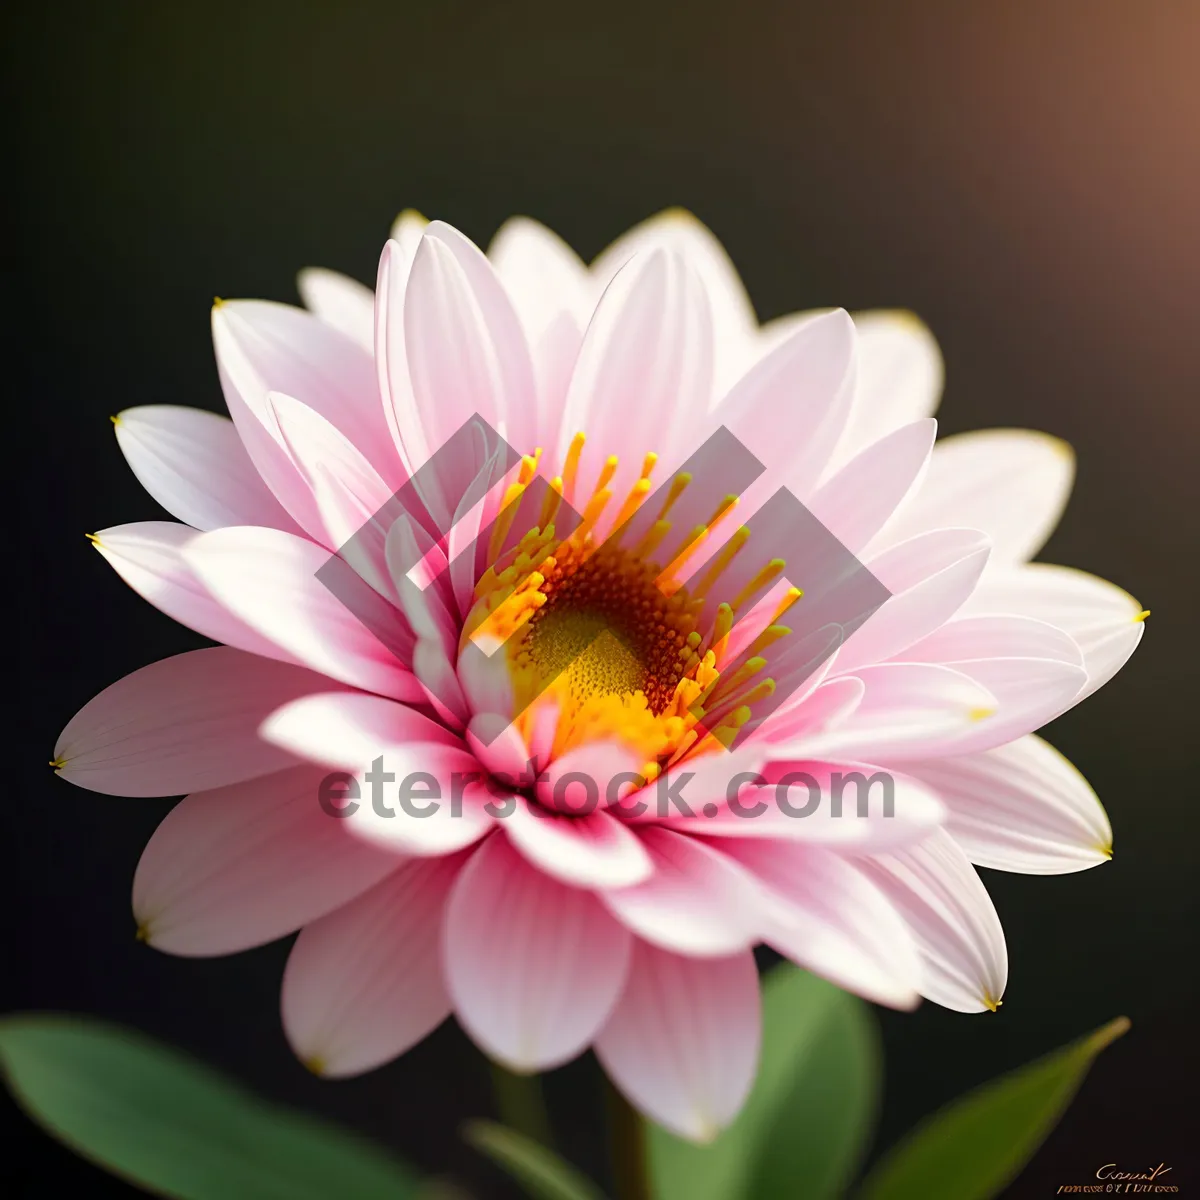 Picture of Pink Lotus Blossom in Full Bloom